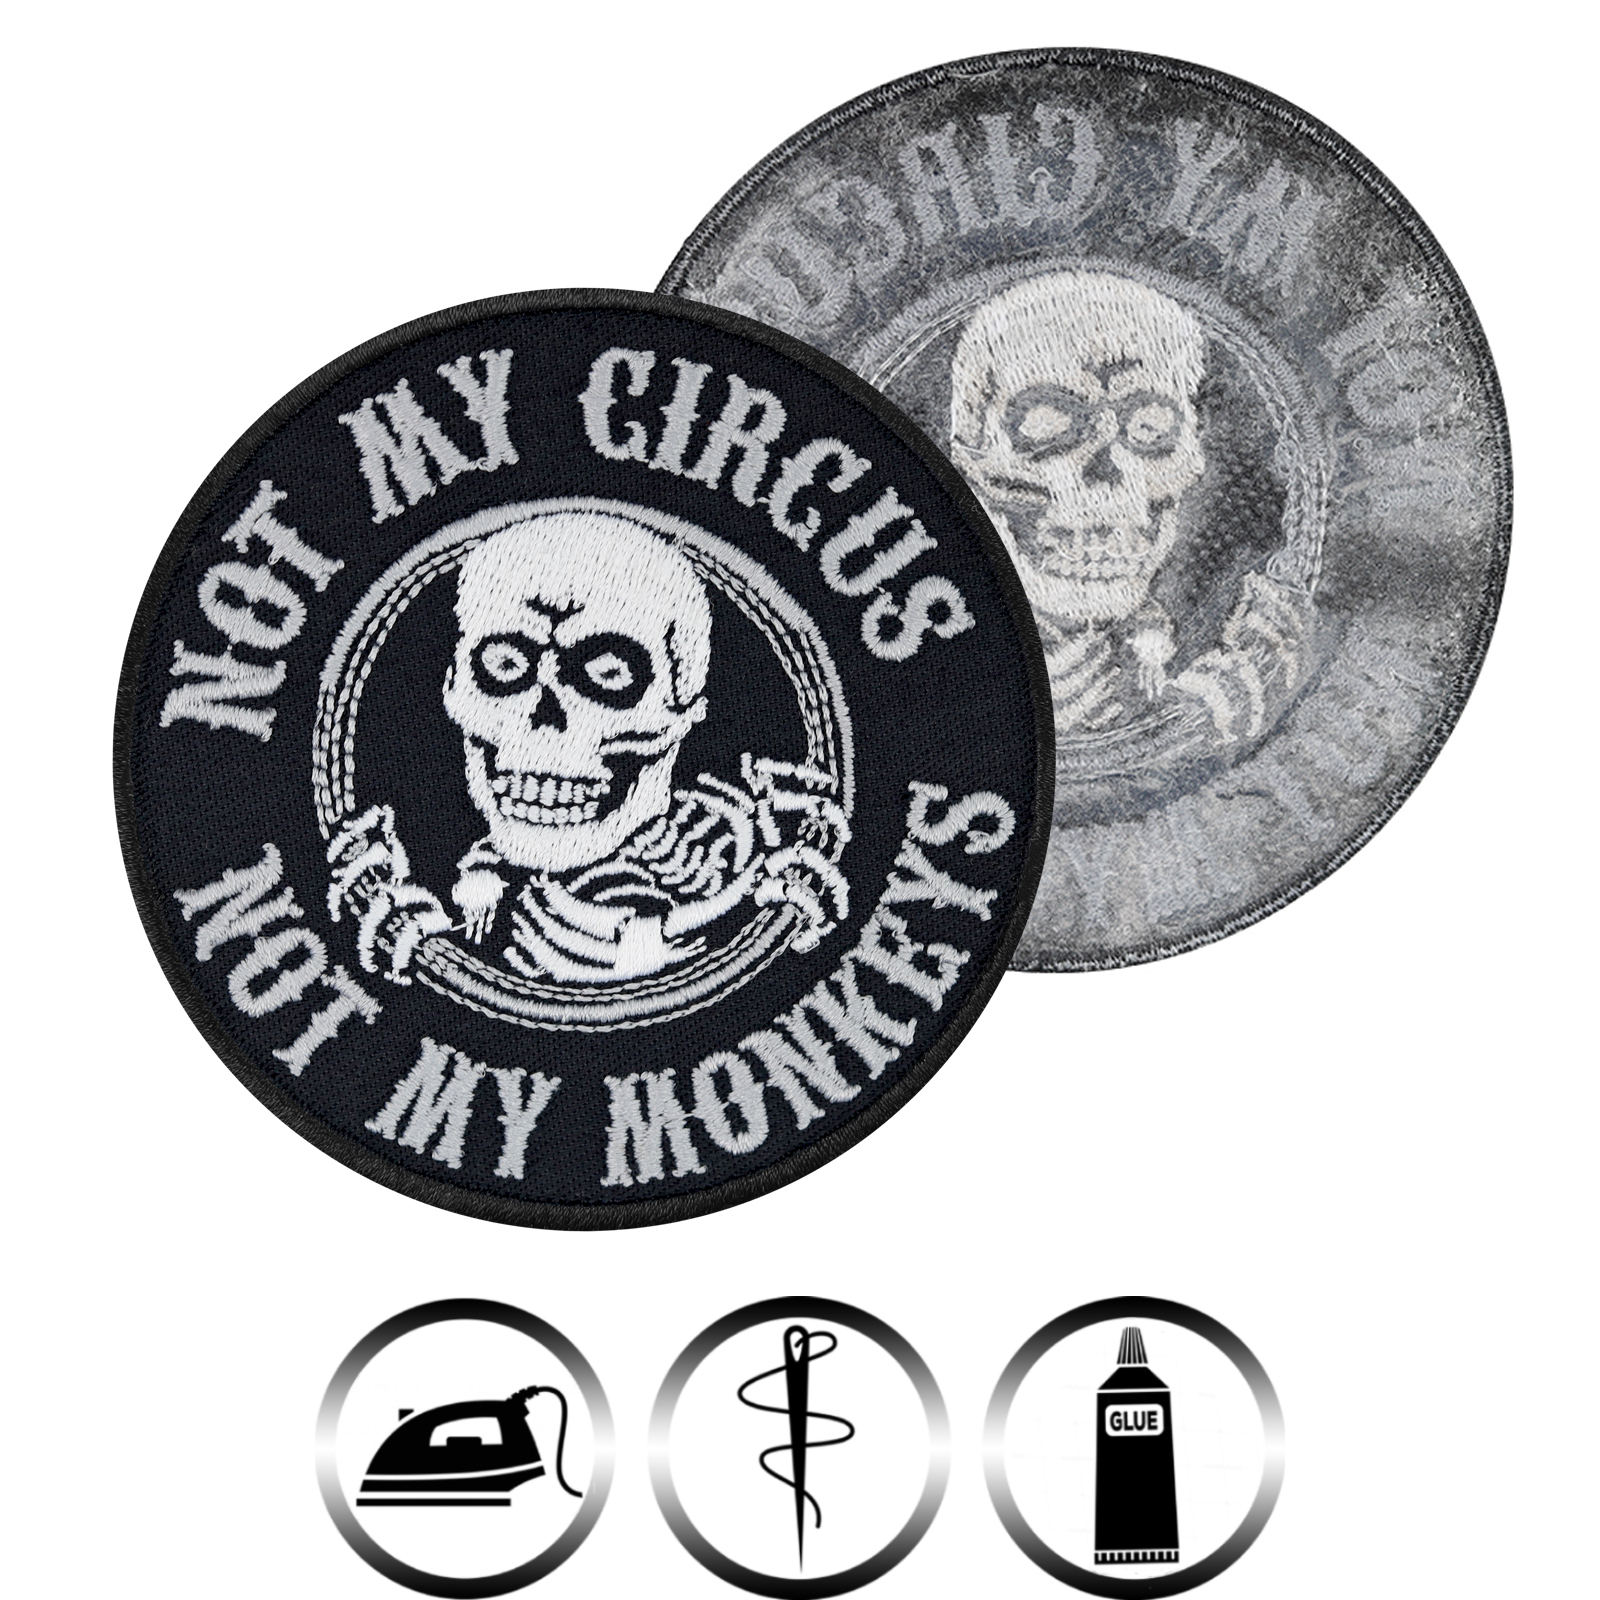 Not my circus, not my monkeys - Patch